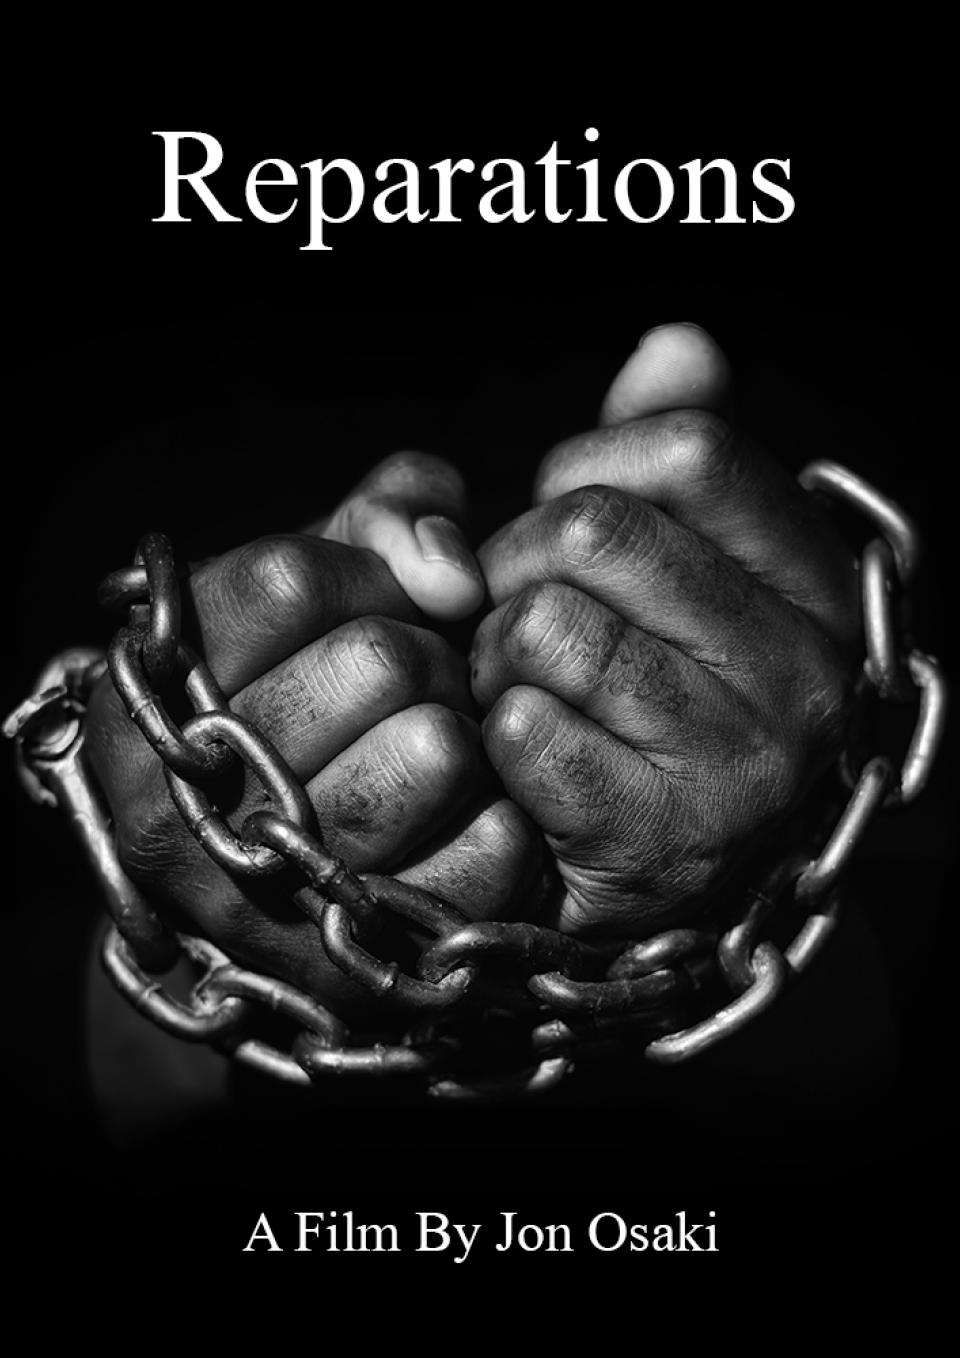 A black and white poster image for the film Reparations. A Black person’s hands are clutched together wrapped with metal chains.